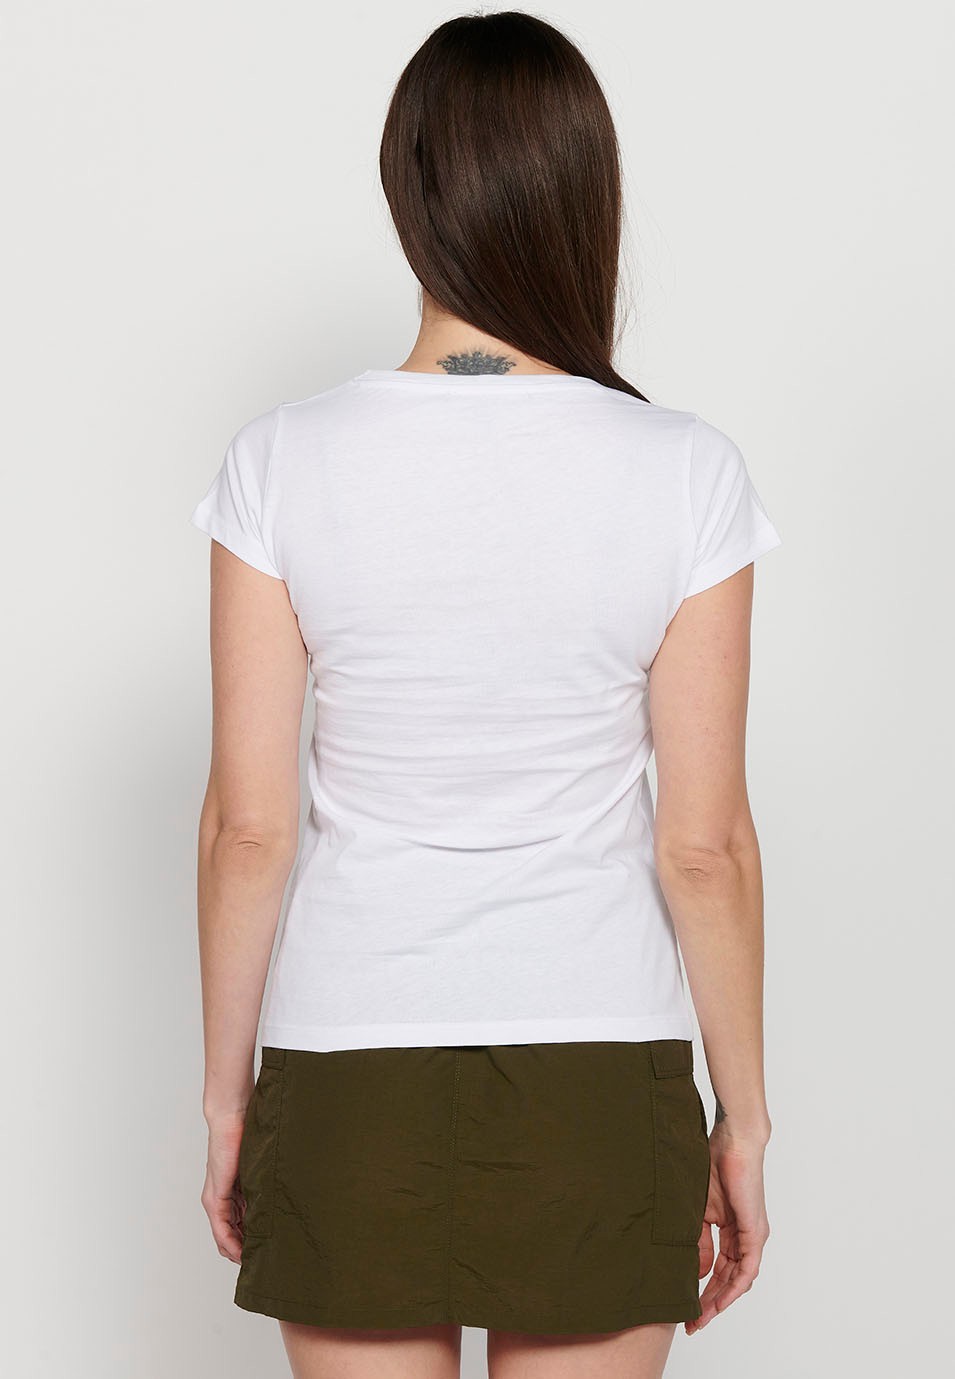 White Short Sleeve Cotton T-shirt with Round Neck and Front Print for Women